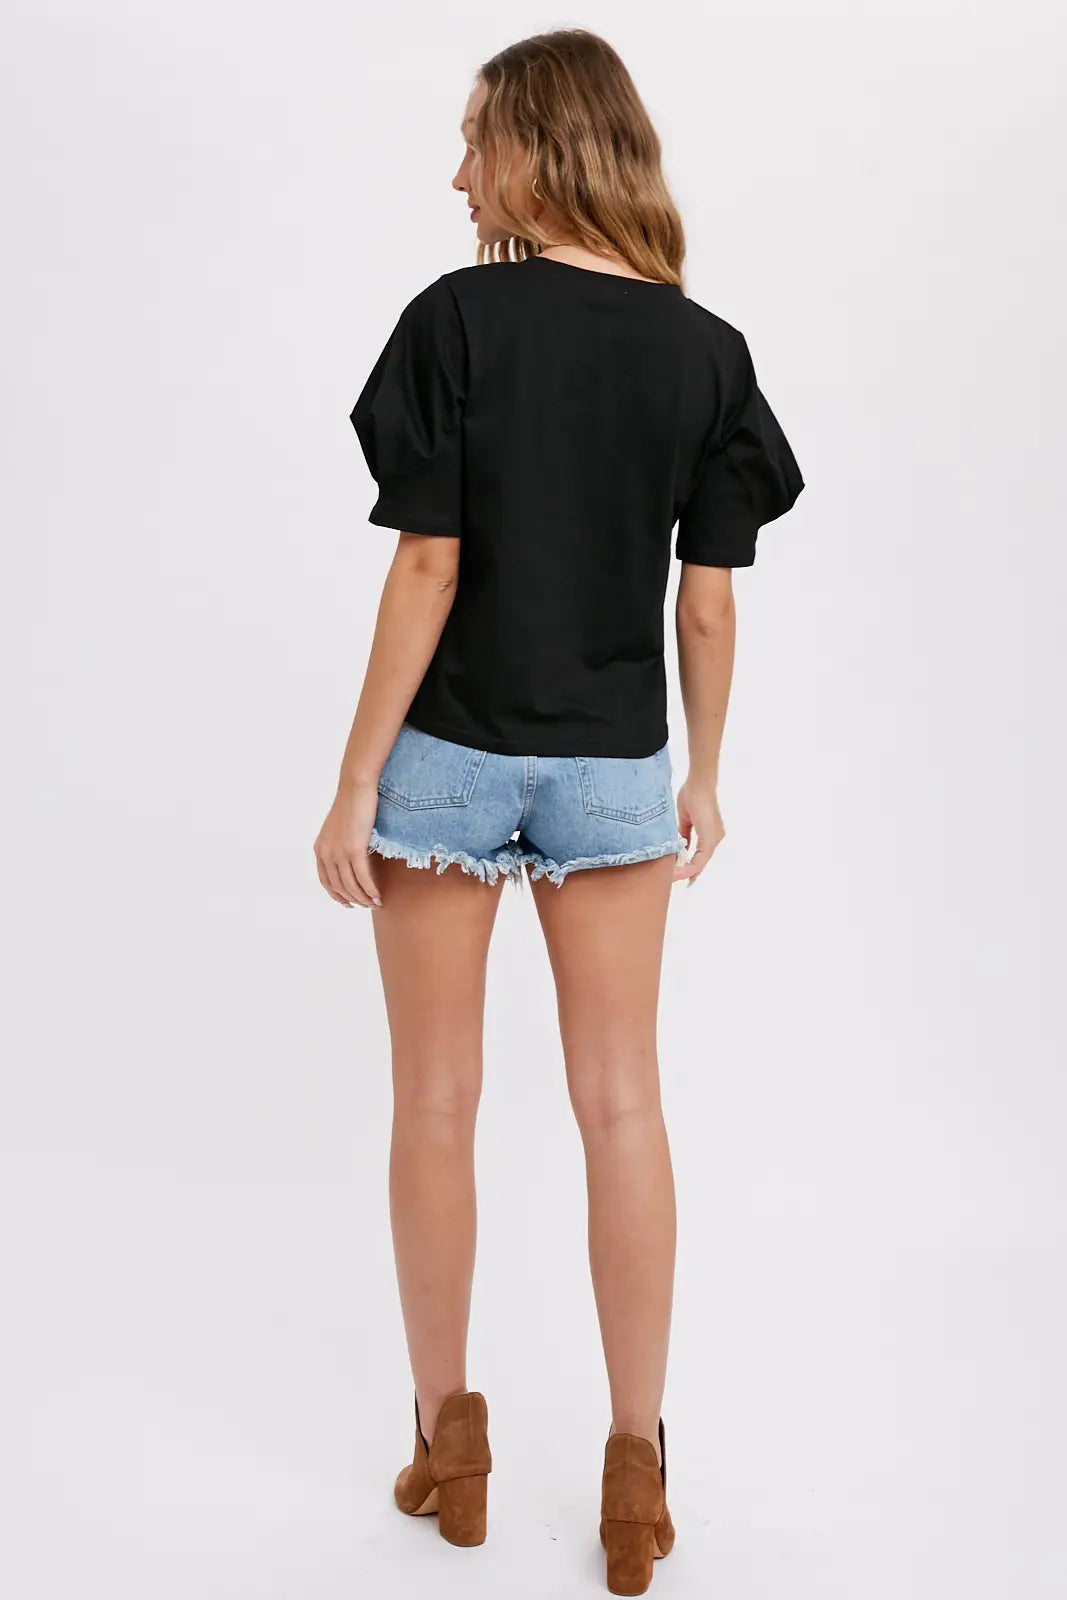 Black Puff Sleeve Top - KC Outfitter